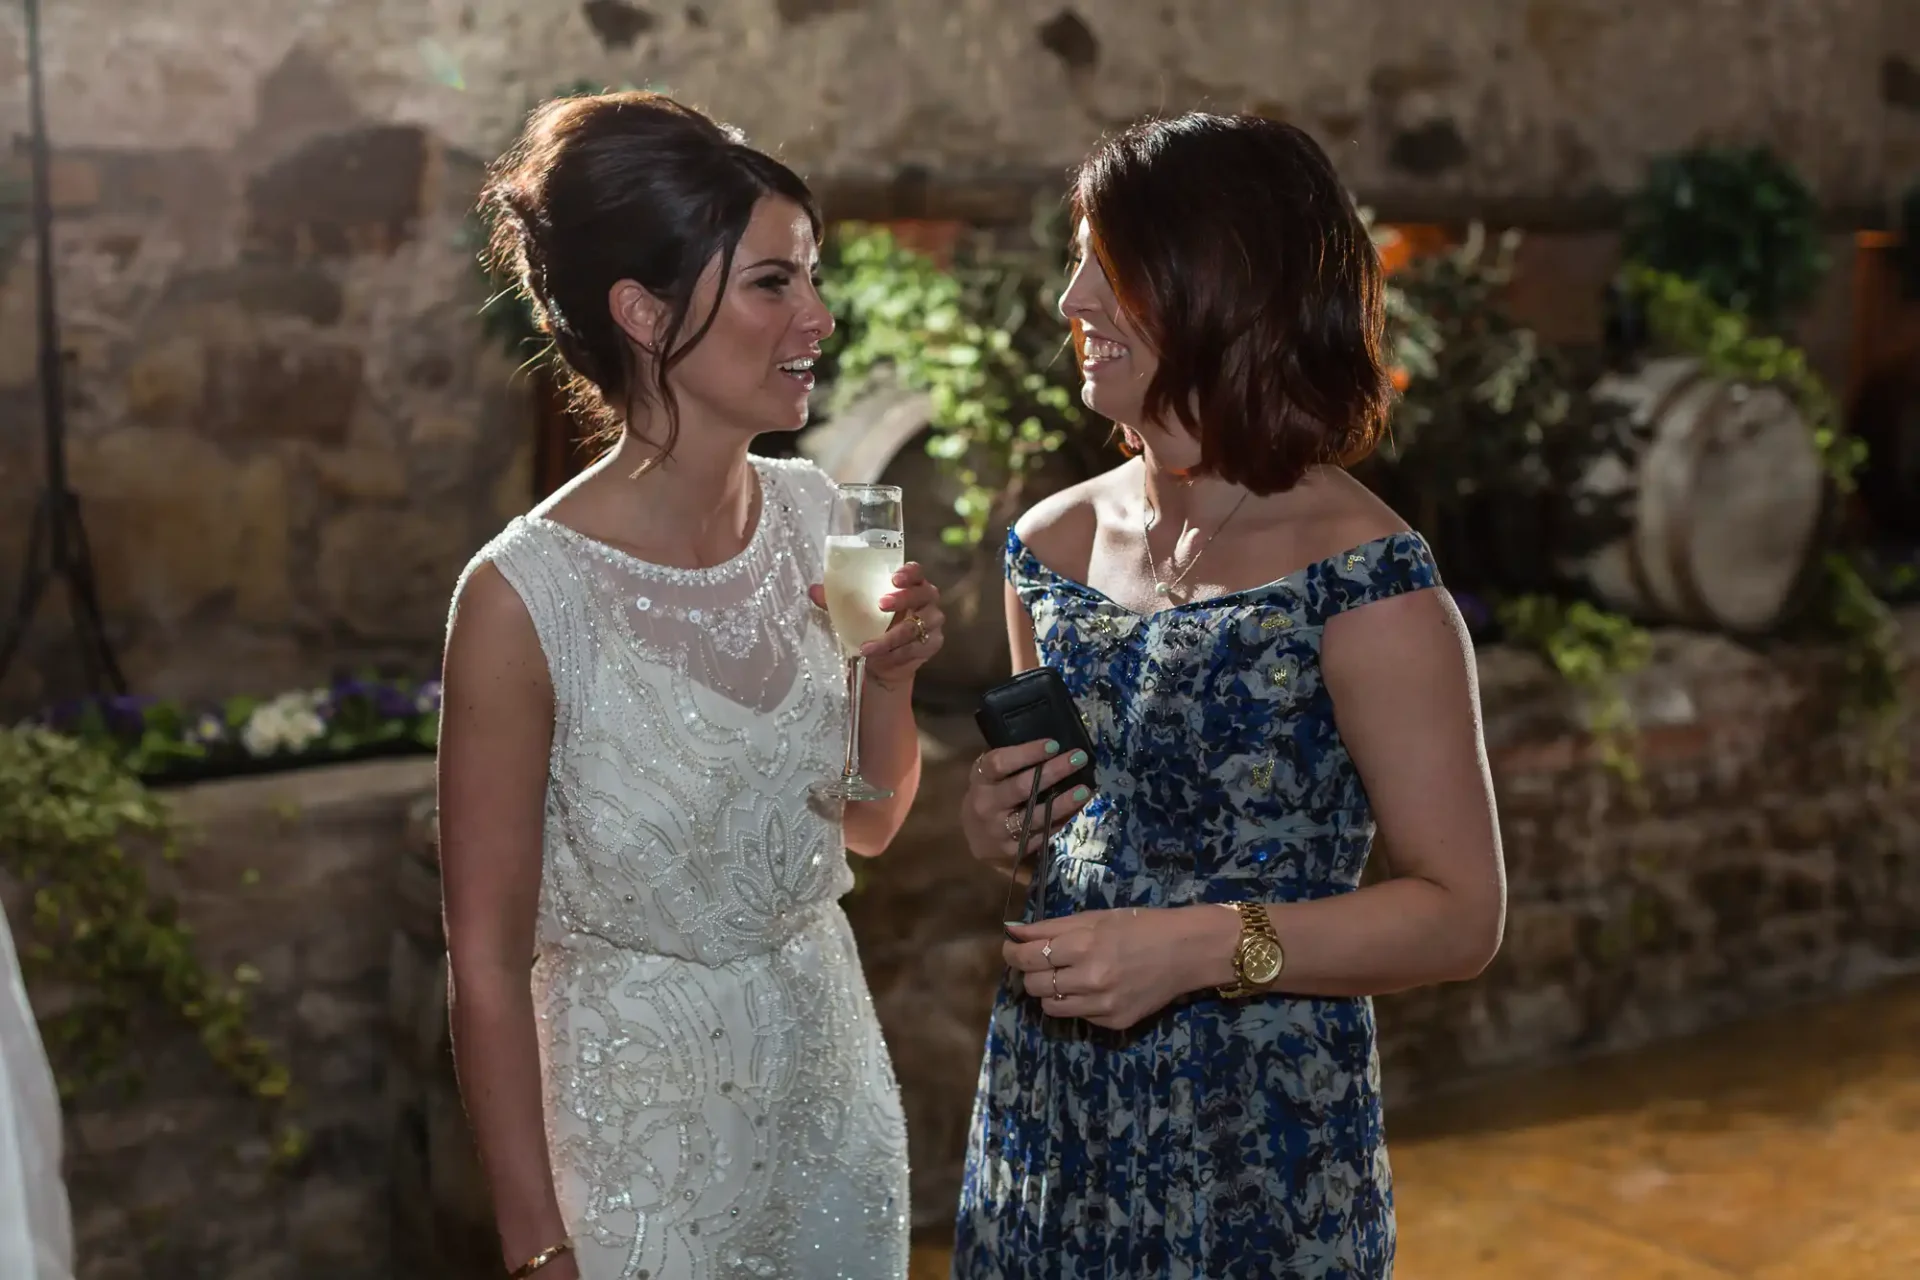 Two women smiling and chatting at a formal event, one holding a champagne glass and the other holding a camera.